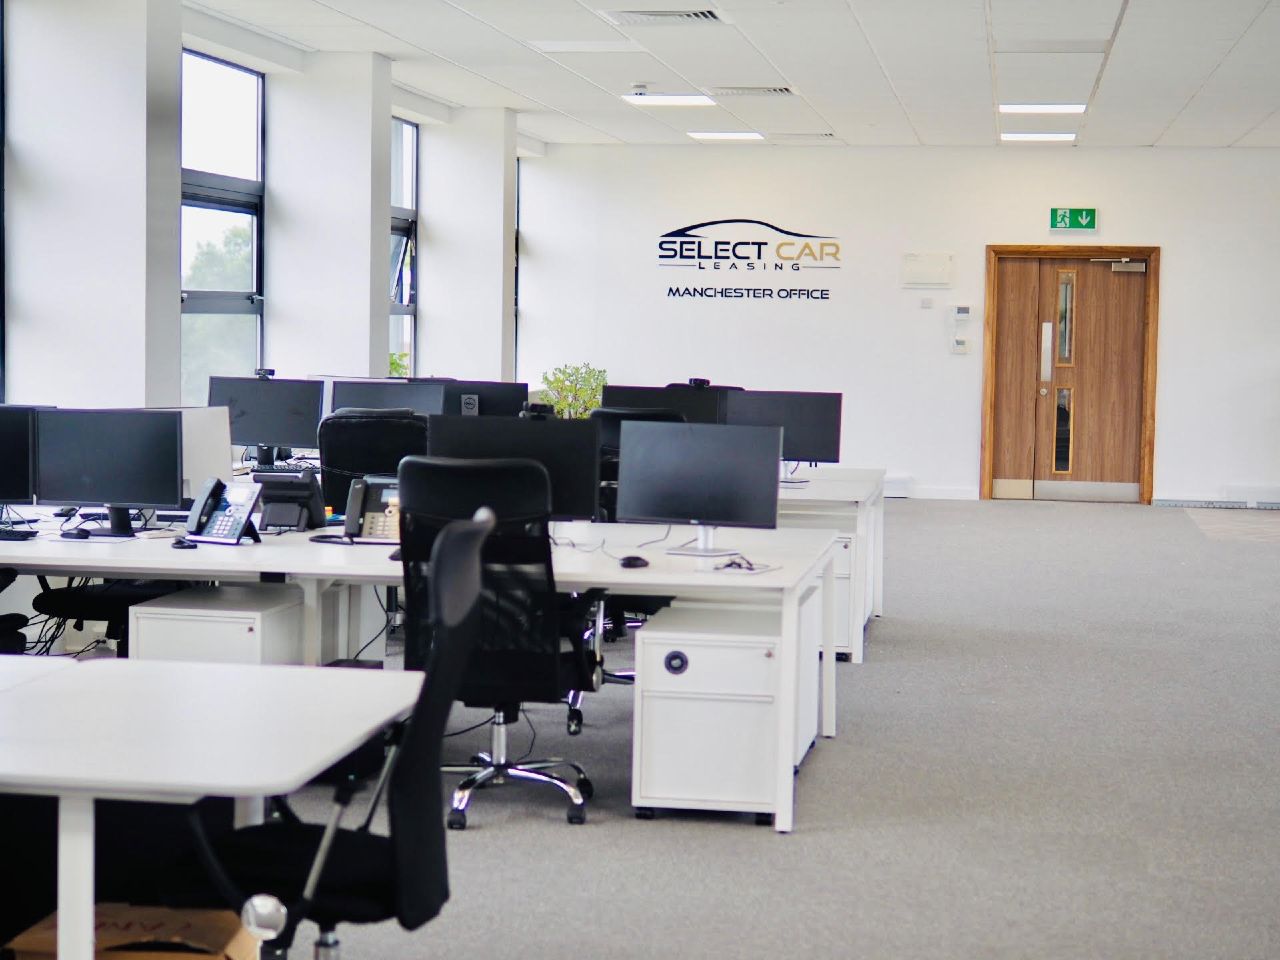 Select Car Leasing Manchester Moves To New Office